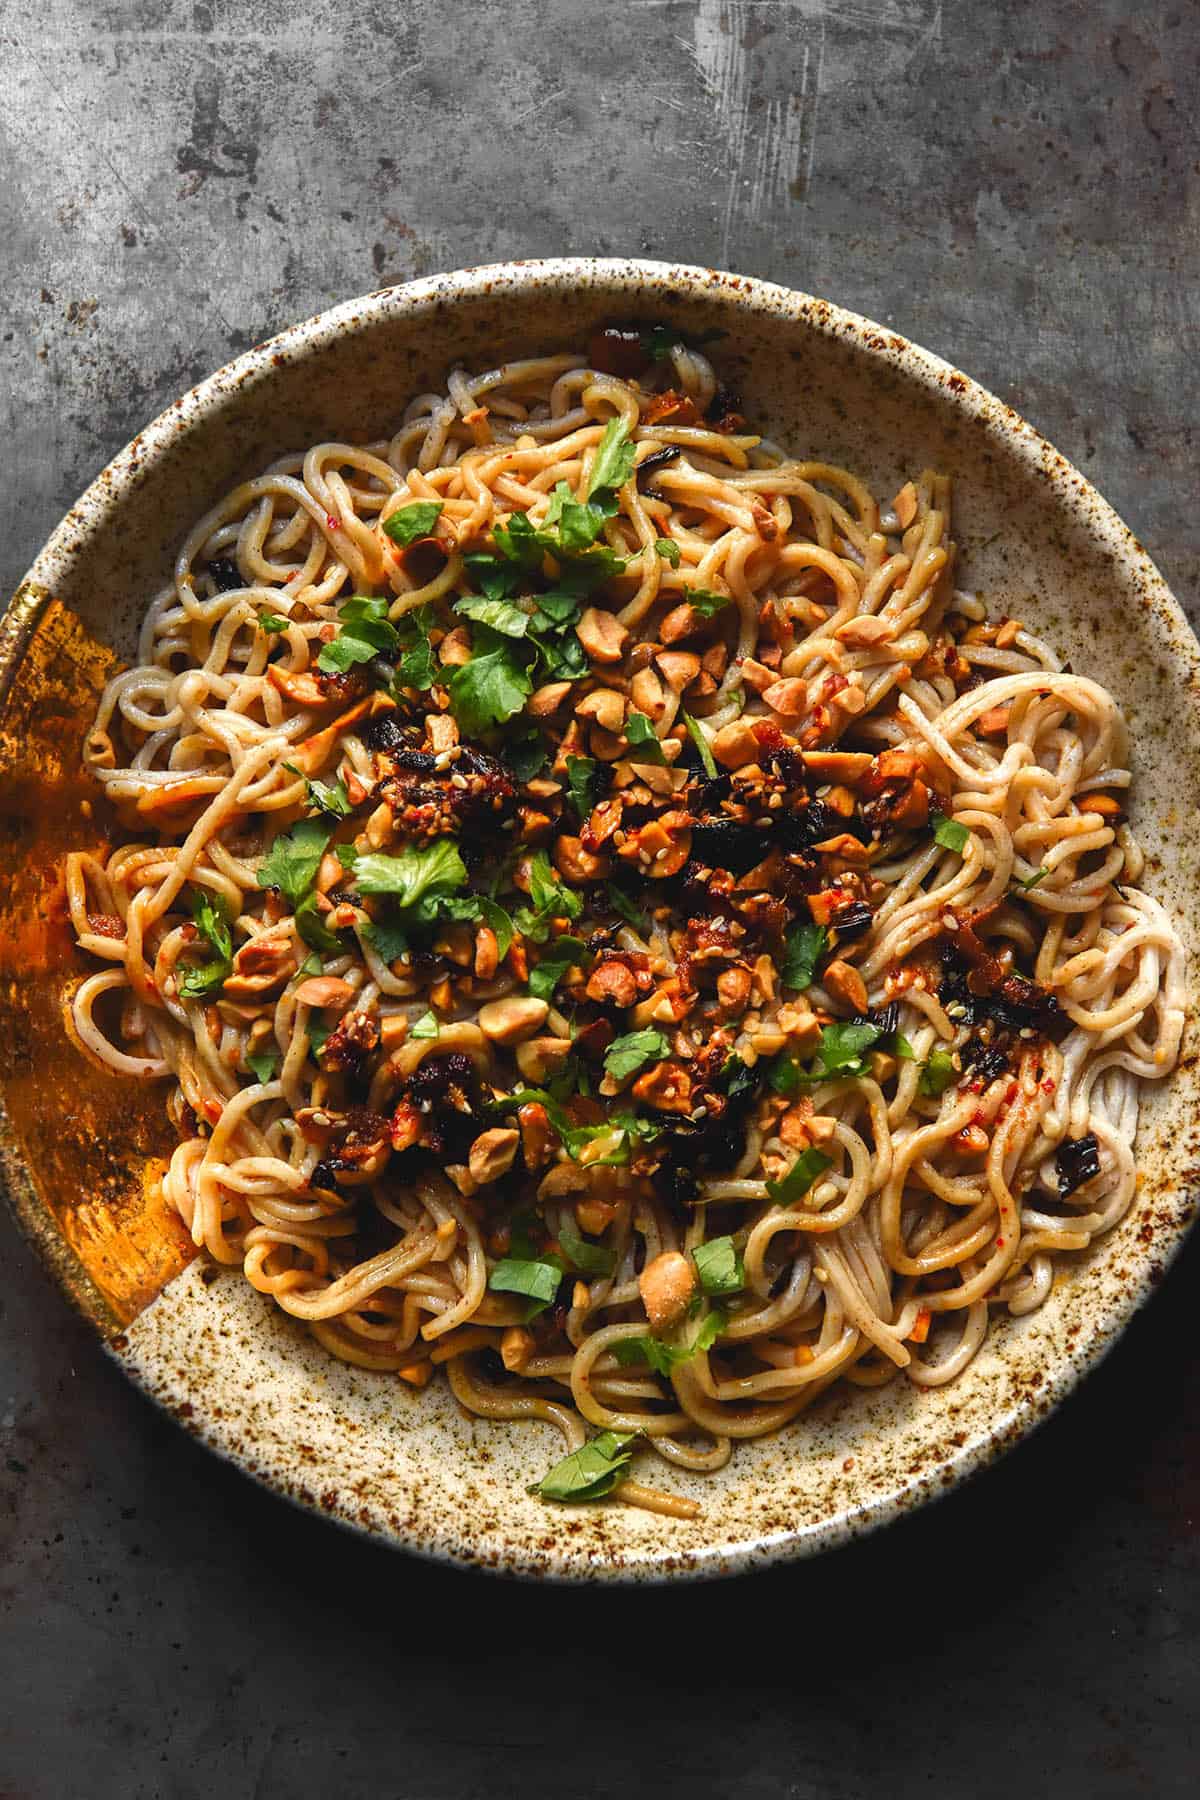 An aerial image of a bowl of low FODMAP chilli oil noodles topped with tofu crumbles. The bowl sits on a dark metal backdrop.